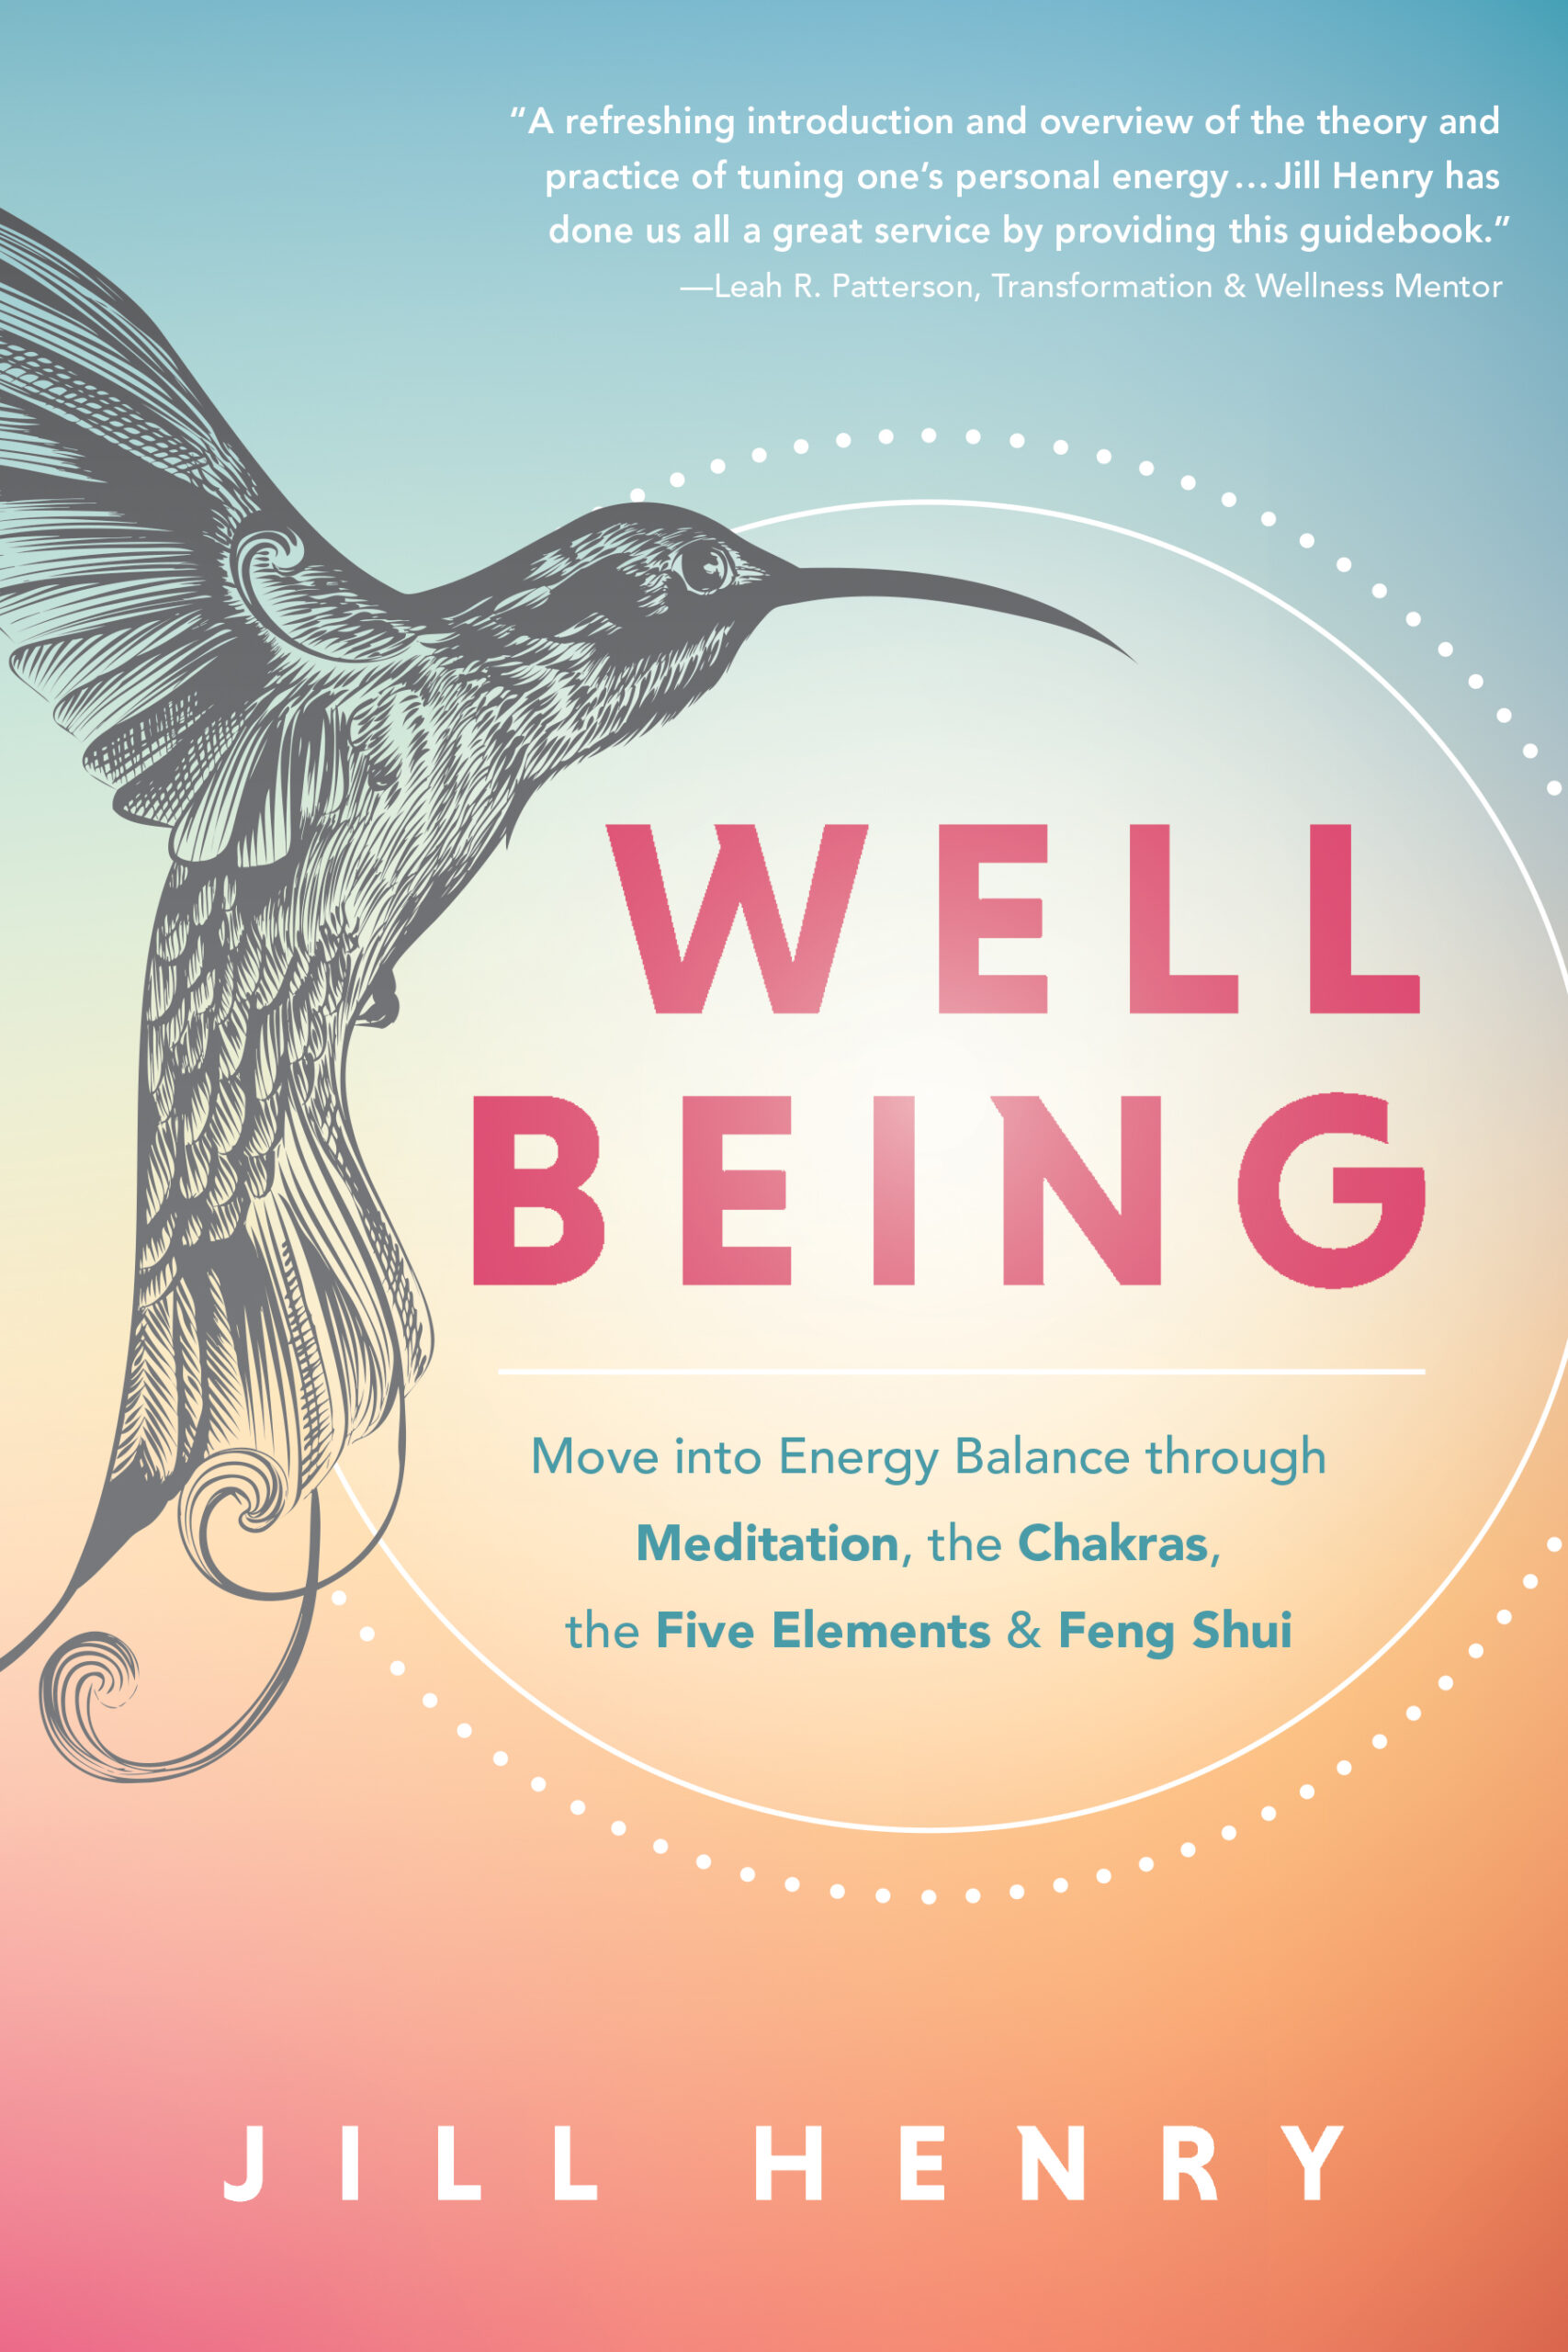 Well-Being Book Cover by Jill Henry